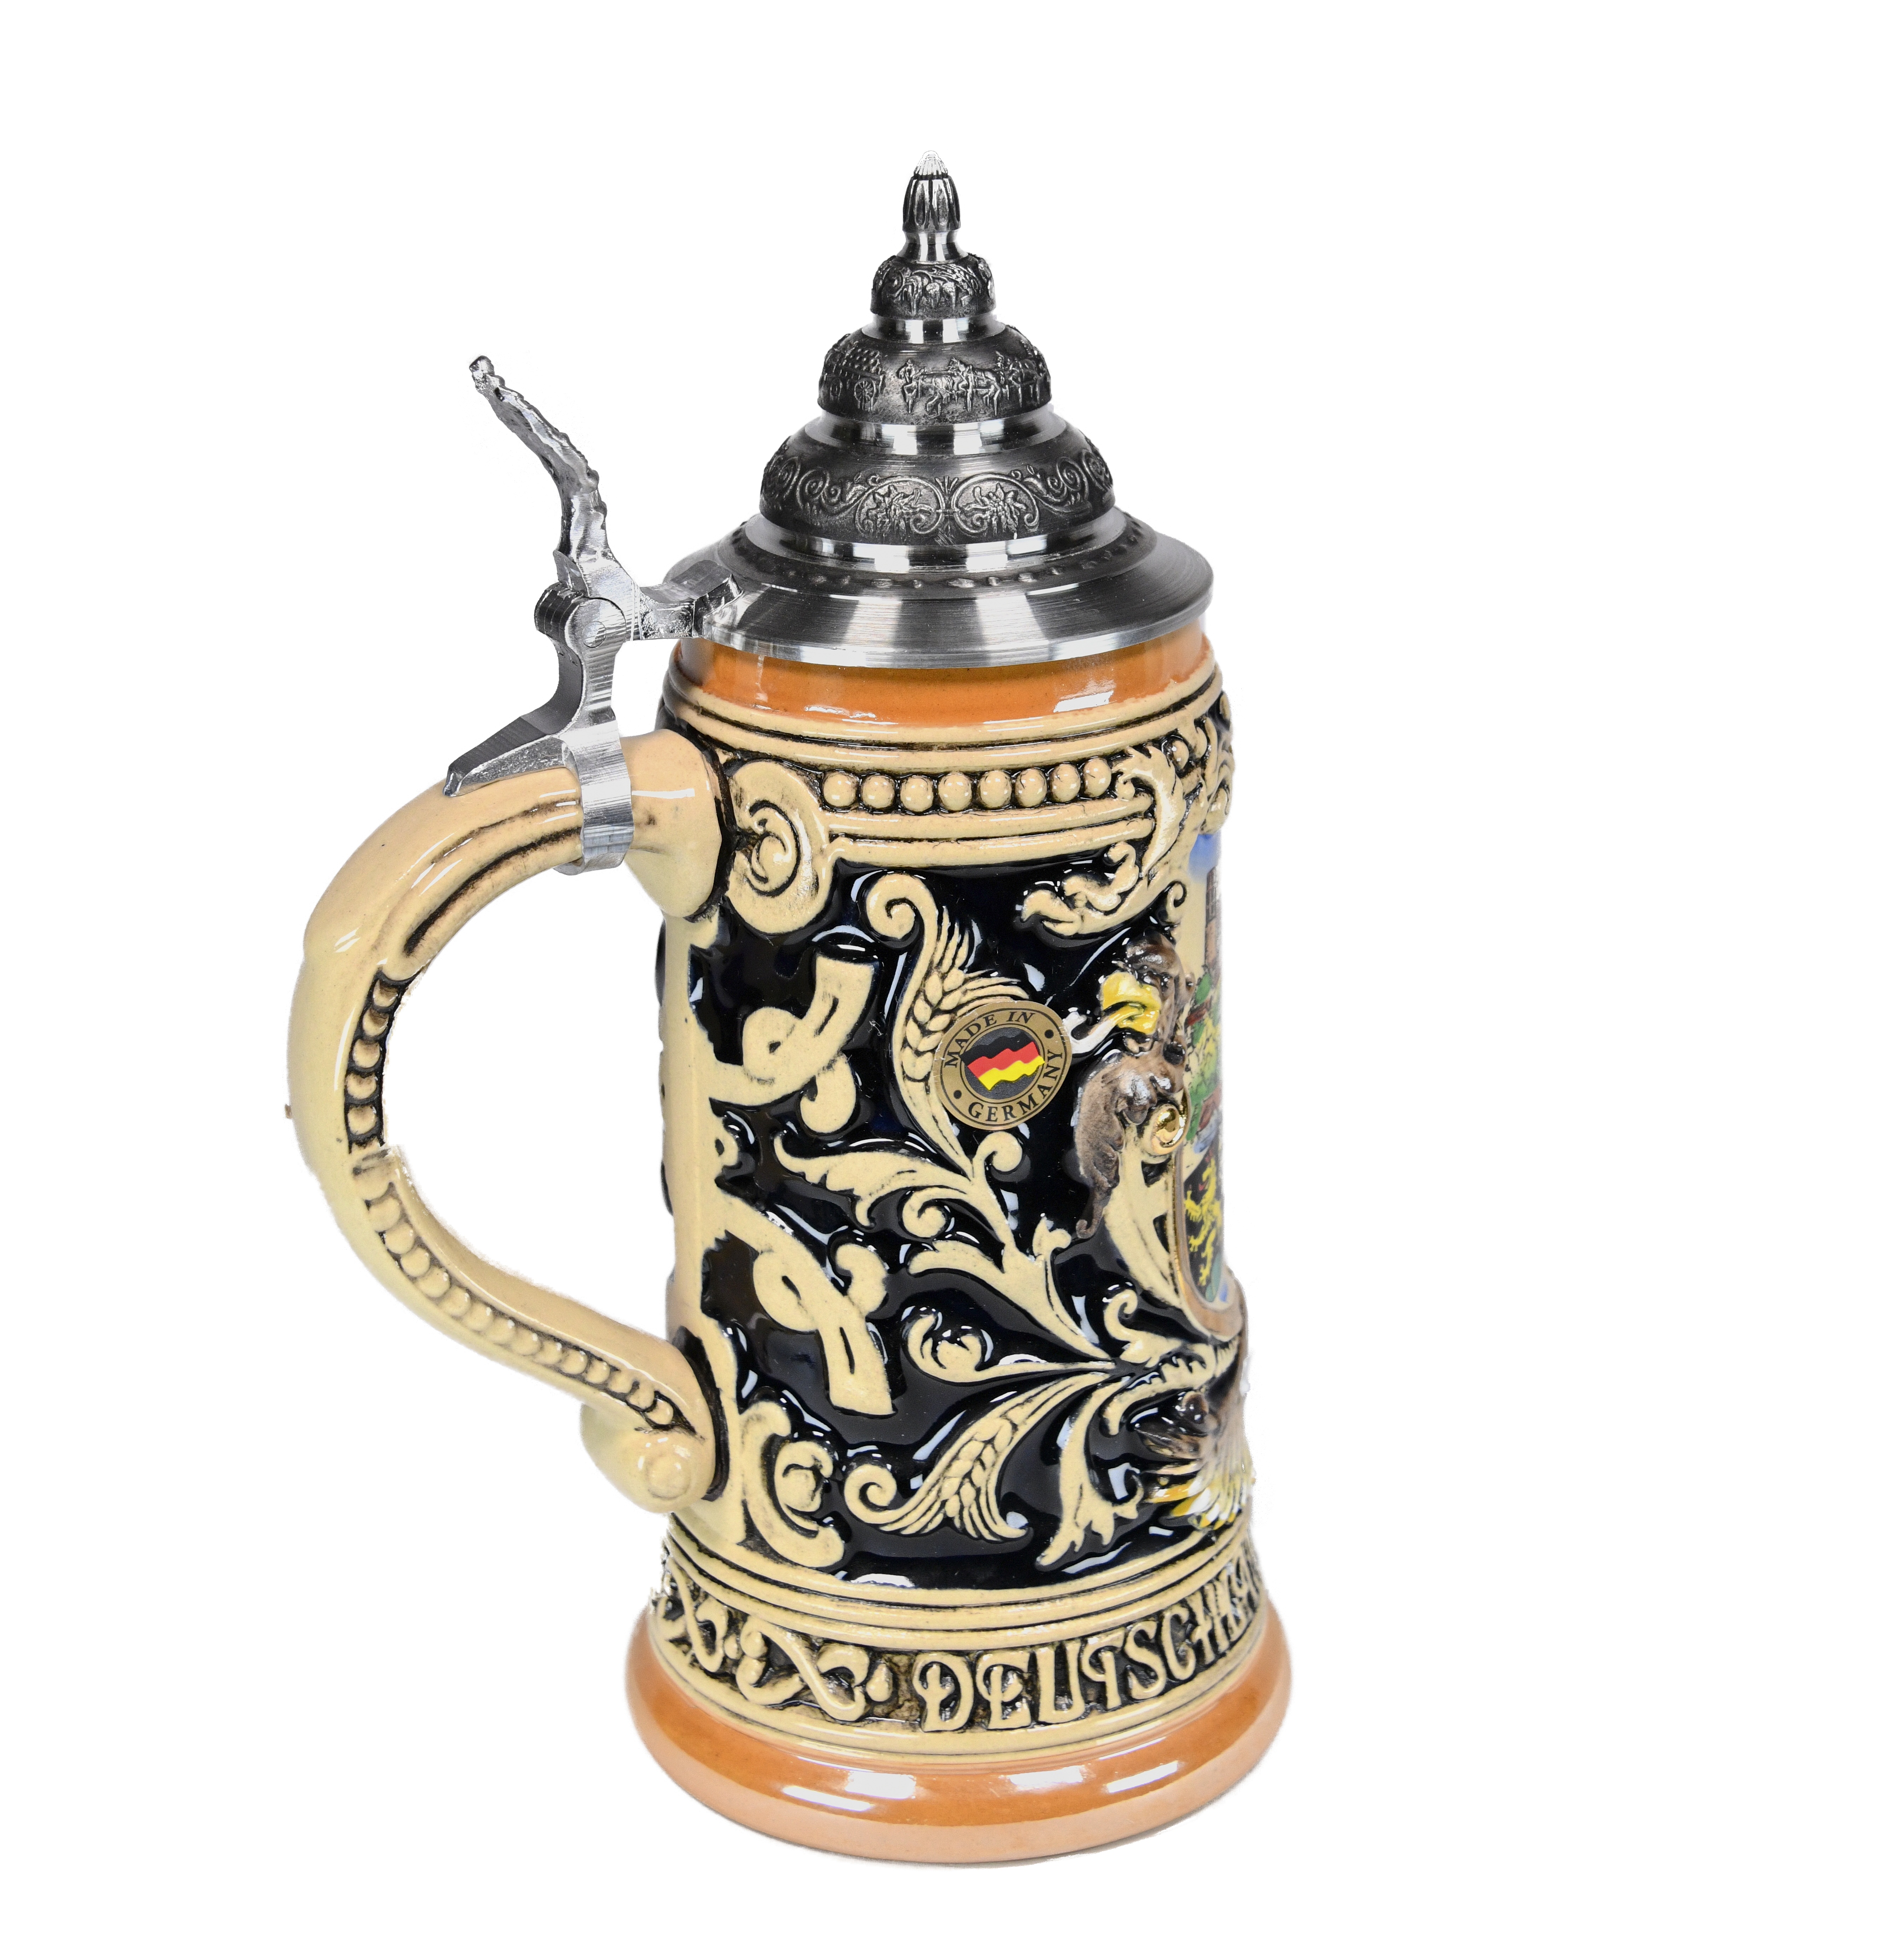 Beer stein by King - Heidelberg City Skyline Relief Authentic German Beer Stein 0.4l Limited Edition - image 5 of 6